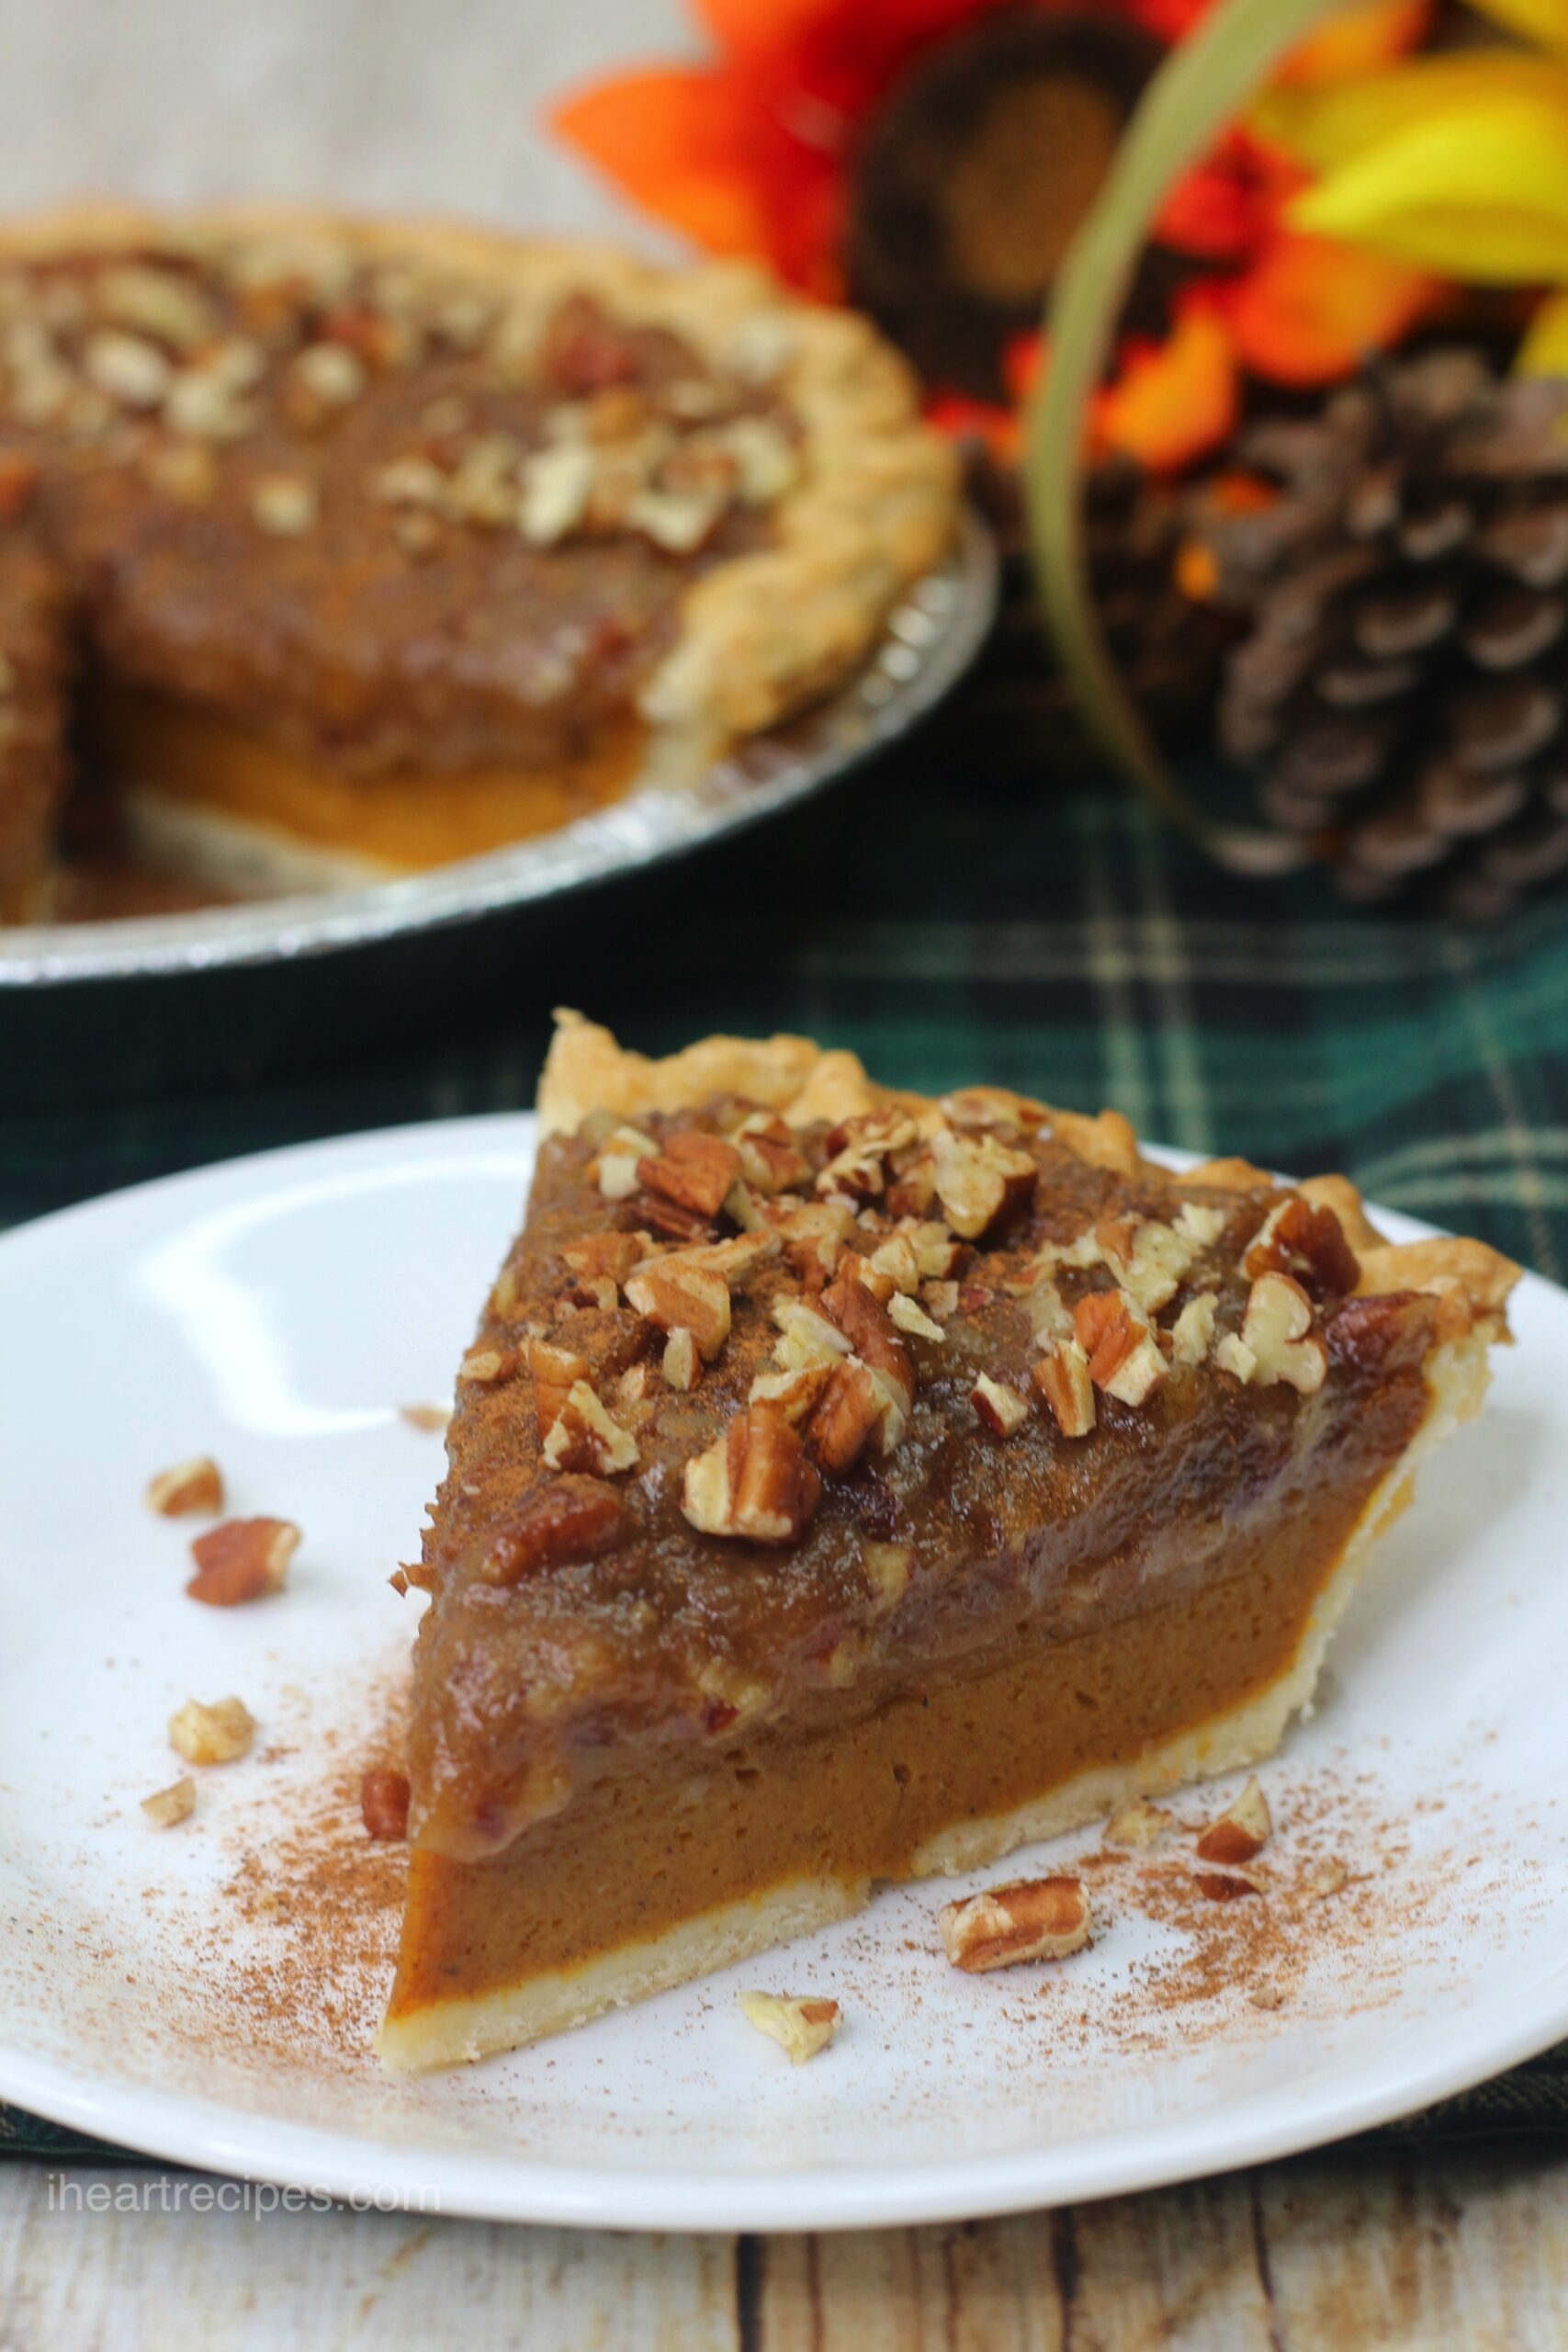 A slice of pecan pumpkin pie served on a white dessert plate. The pie is topped with chopped pecans and dusted with cinnamon. A whole pecan pumpkin pie is in an aluminum pie dish in the background.